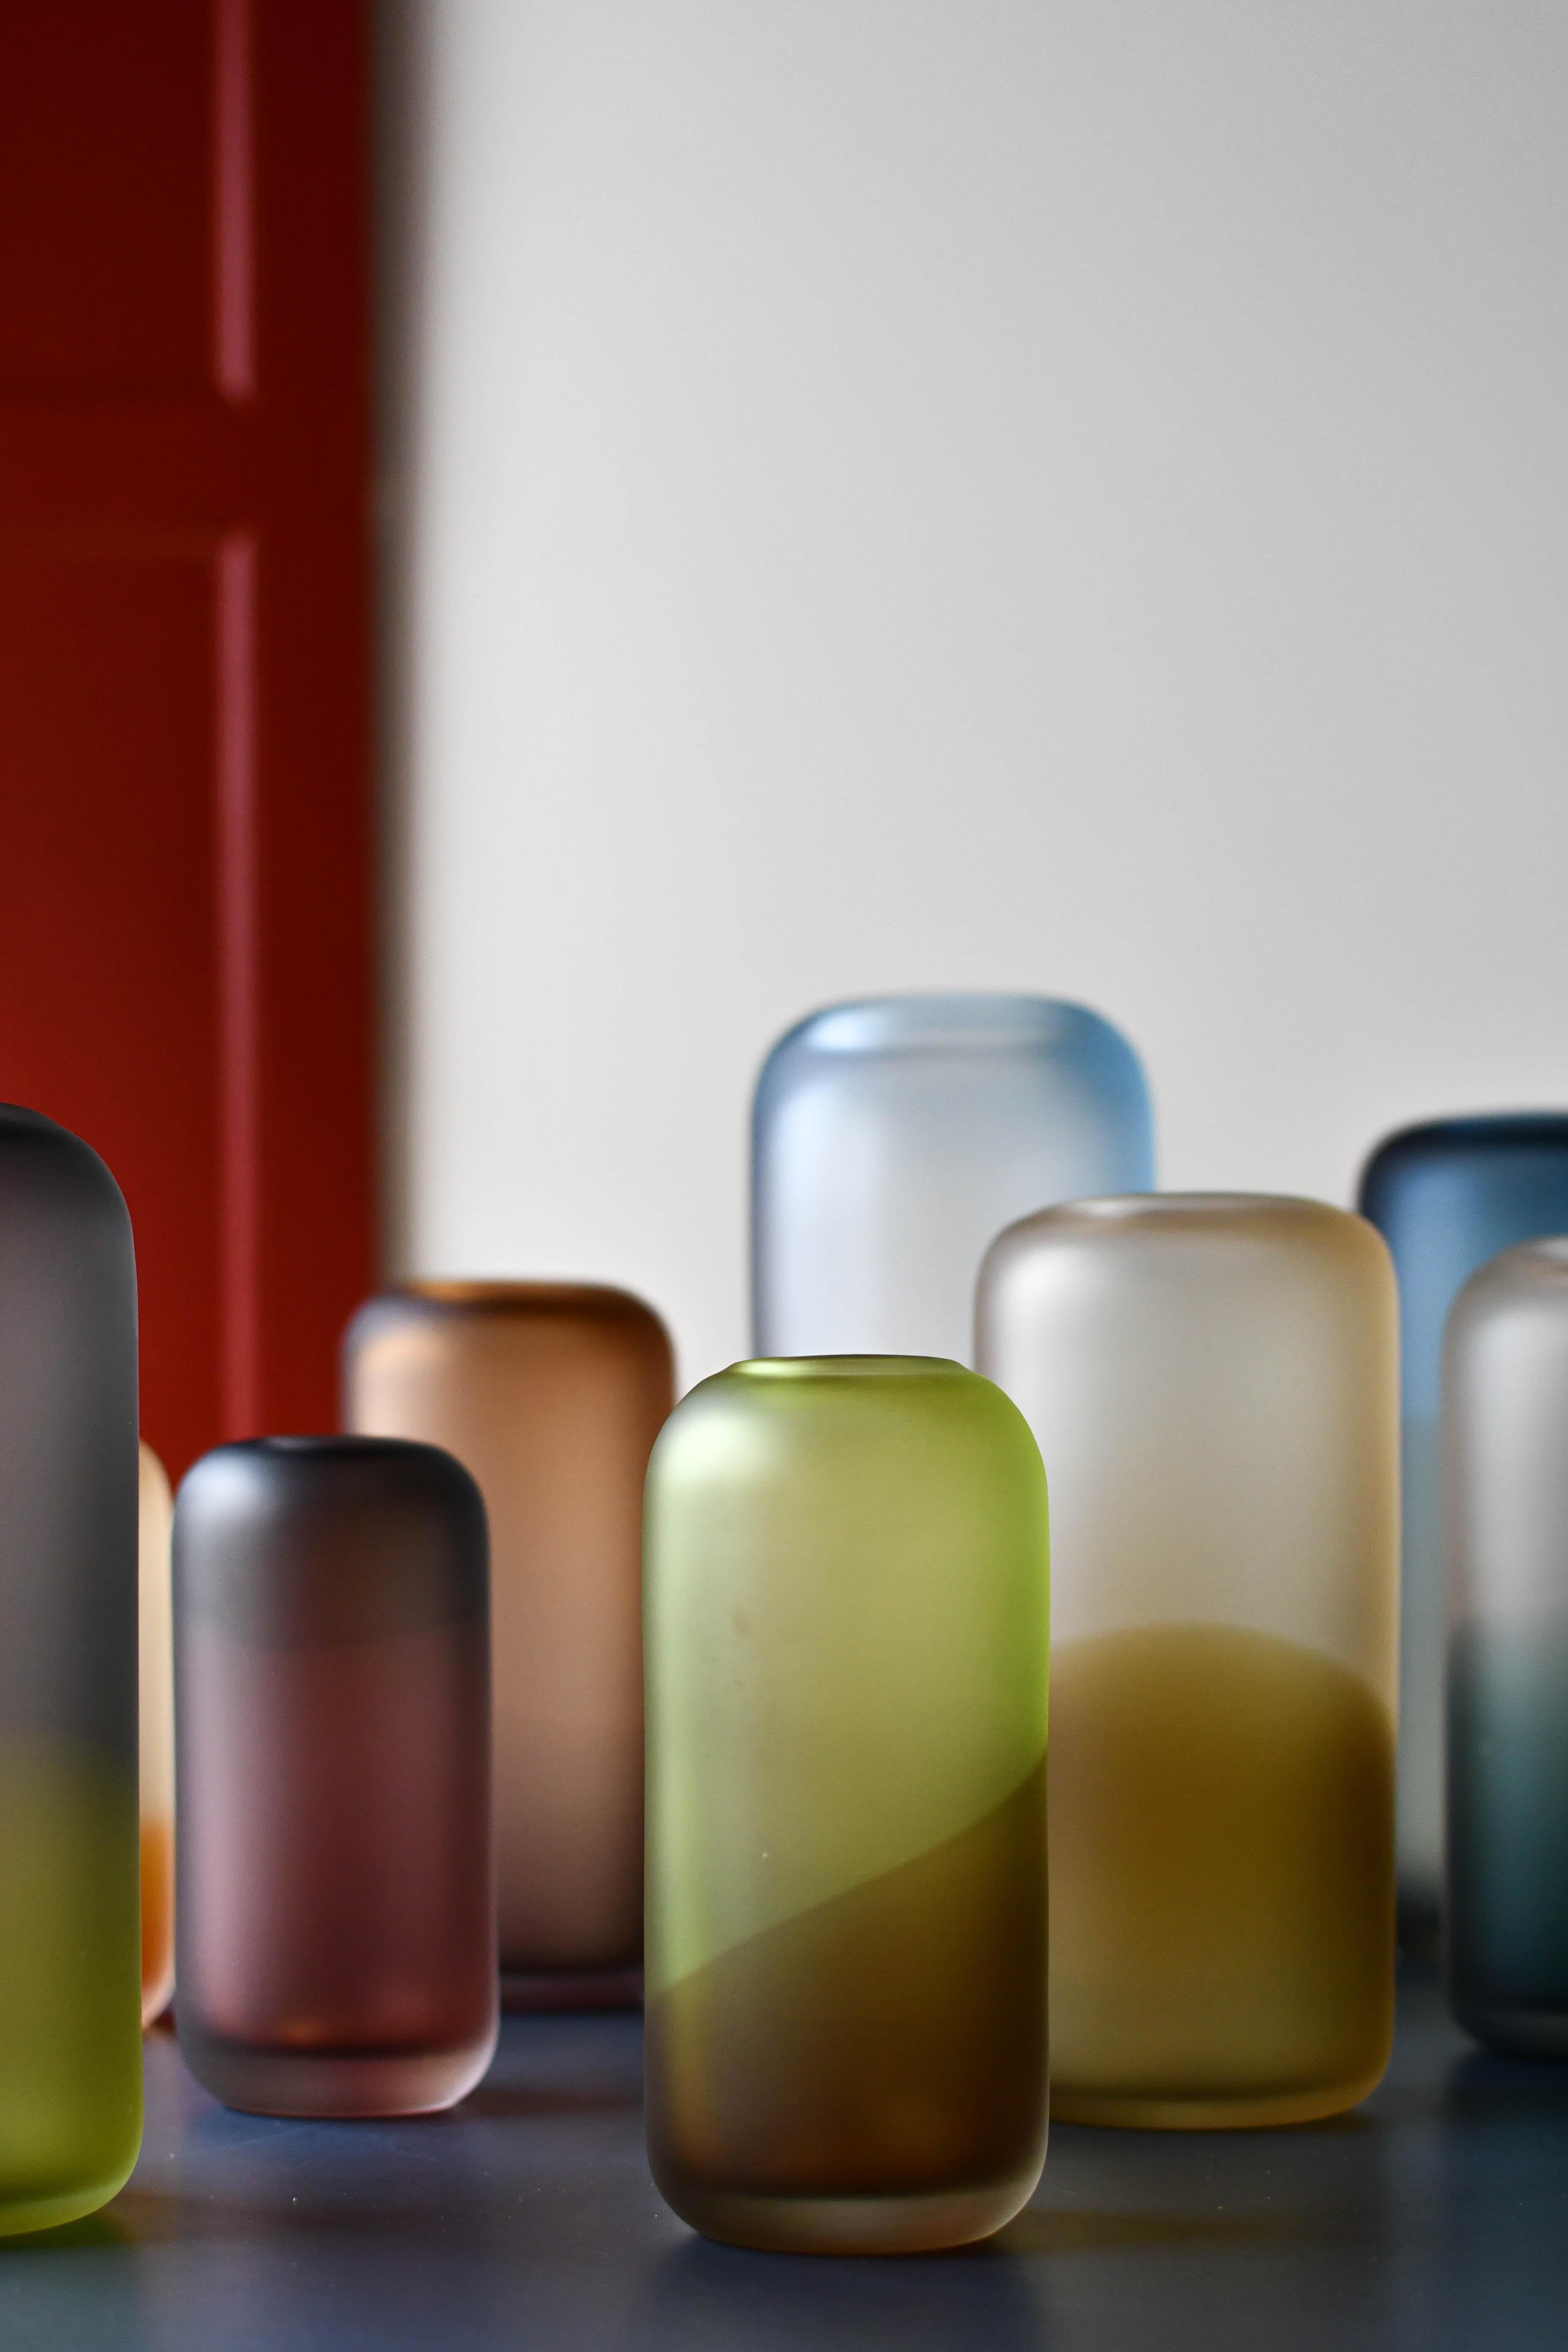 The collection called ‘Gradienti’ is inspired by the infinite colour nuances of the sky. The technique used to make these vases is called ‘sfumato’, where the goal is to achieve imperceptible transitions between hues of soft colours. 

Because of